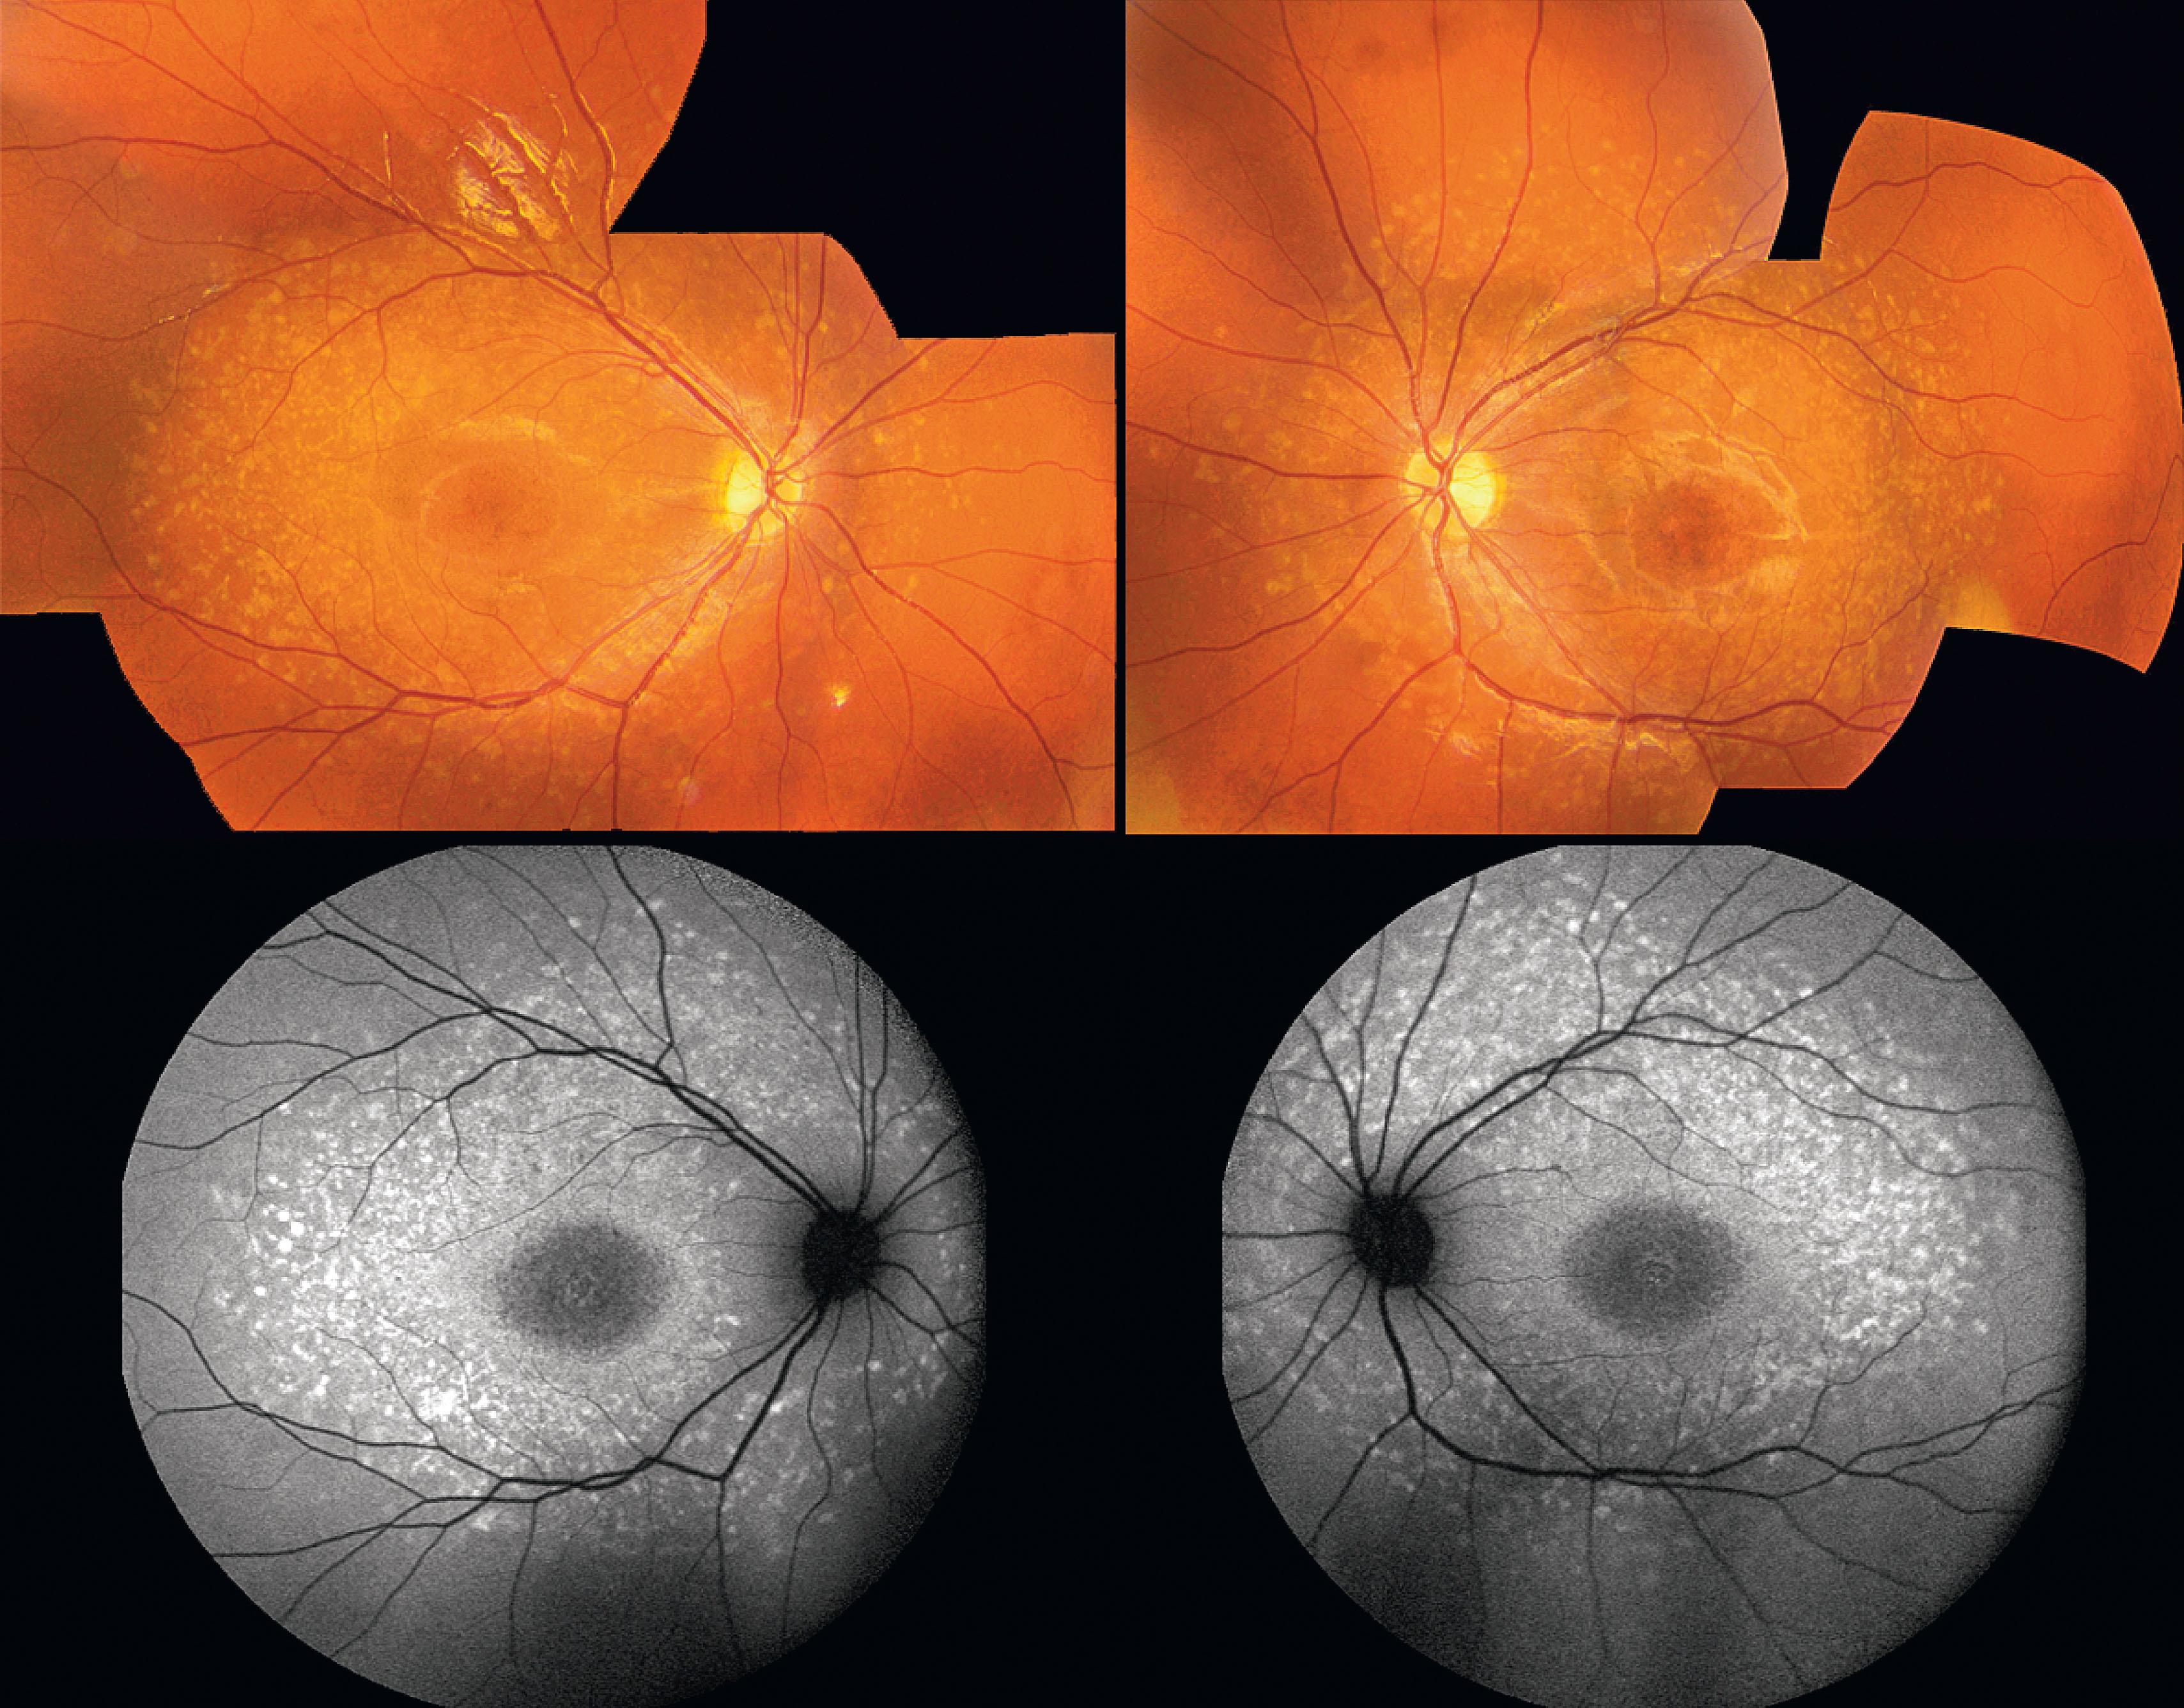 Fig. 49.1, Stargardt disease. Fundus photograph of the left and right eyes of a 9-year-old individual with Stargardt disease (top row). Fundus autofluoresence imaging (bottom row) revealed hyperautofluorescent lesions corresponding to the flecks and abnormal autofluorescence at the foveal region.